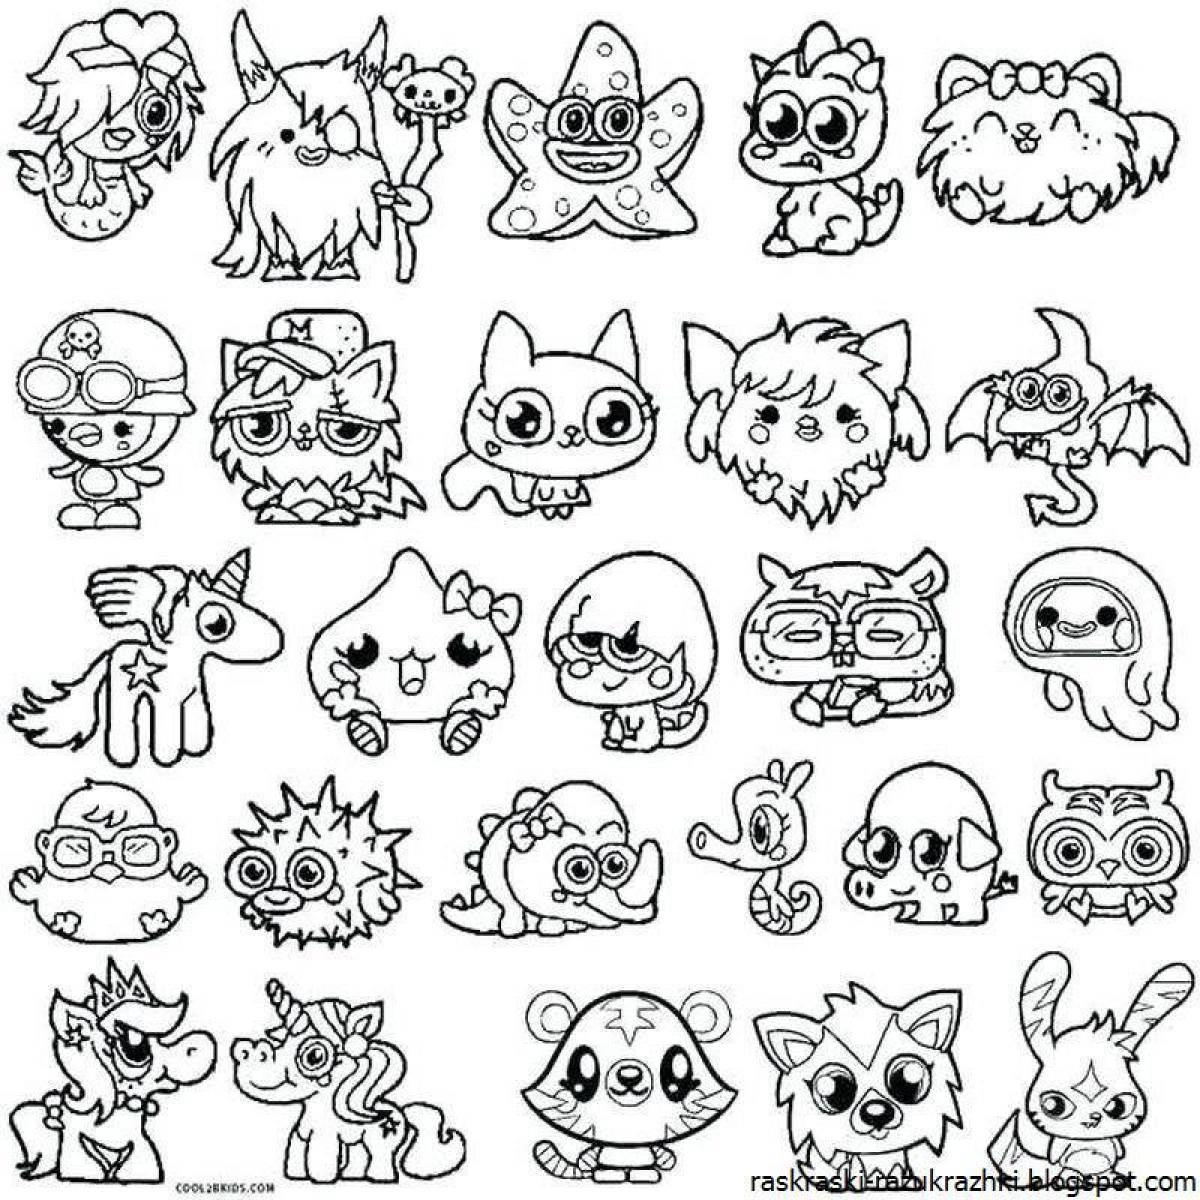 Attractive stickers for coloring